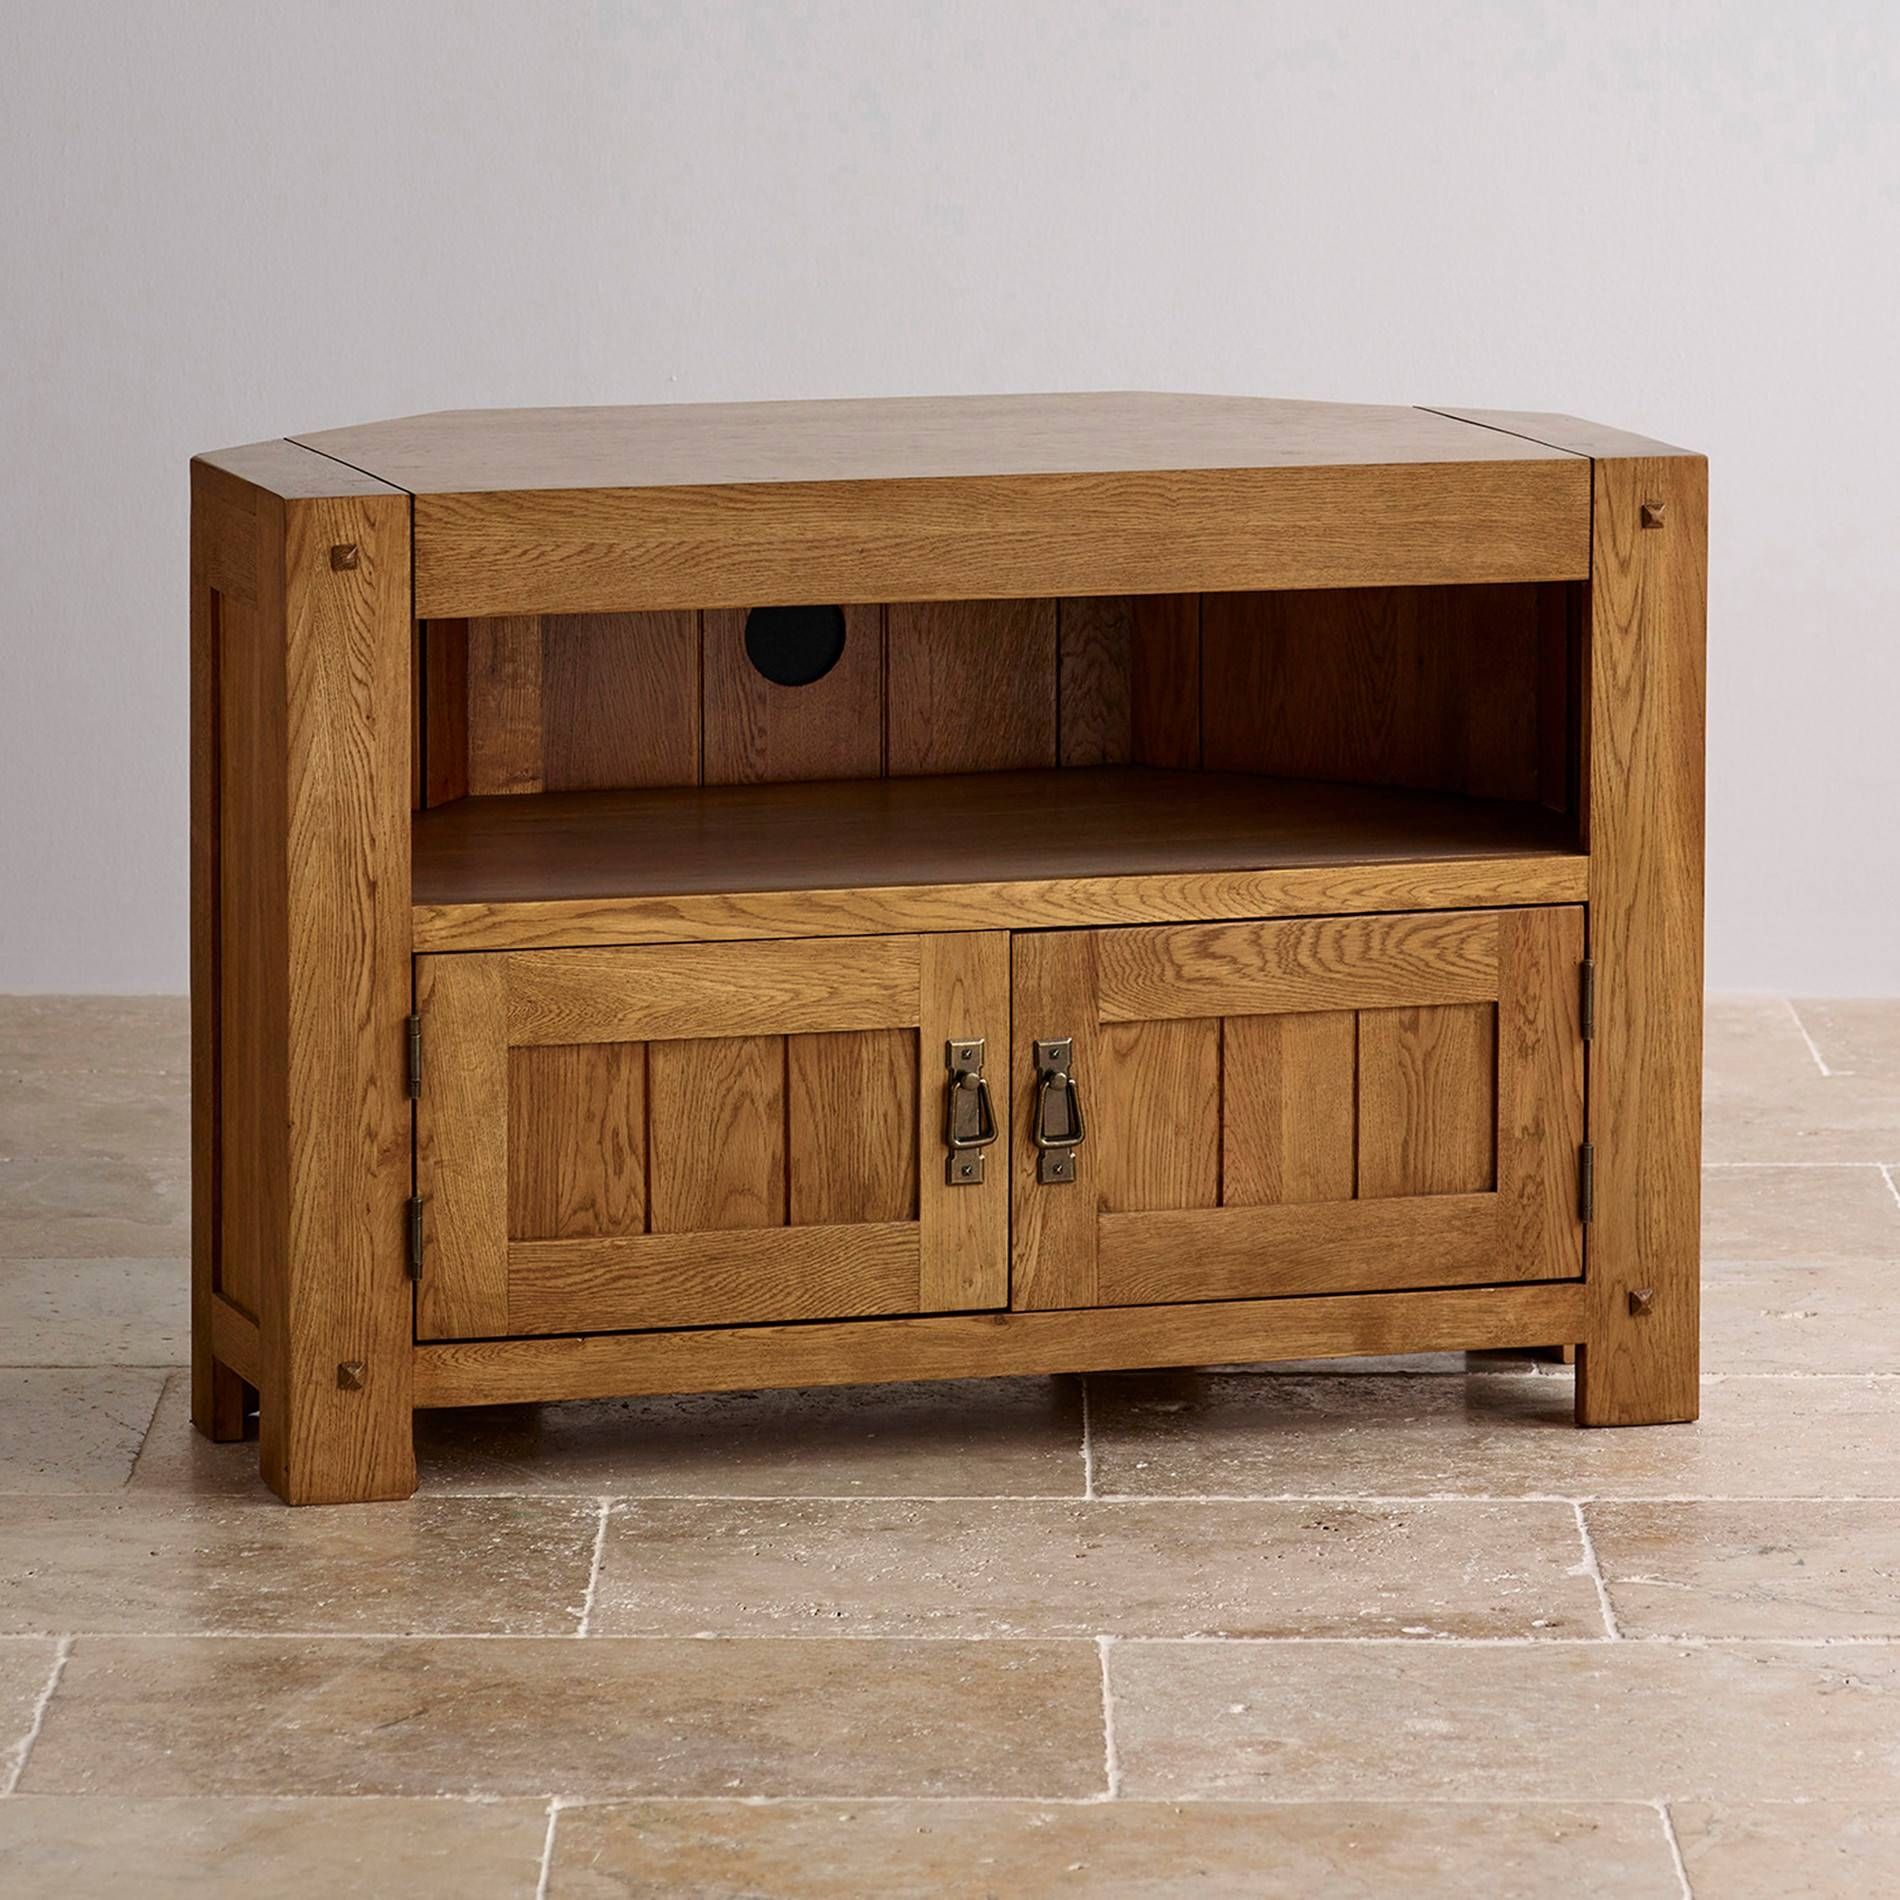 Tv Cabinets & Units | 100% Solid Oak | Oak Furniture Land Throughout Wooden Tv Cabinets (View 8 of 15)